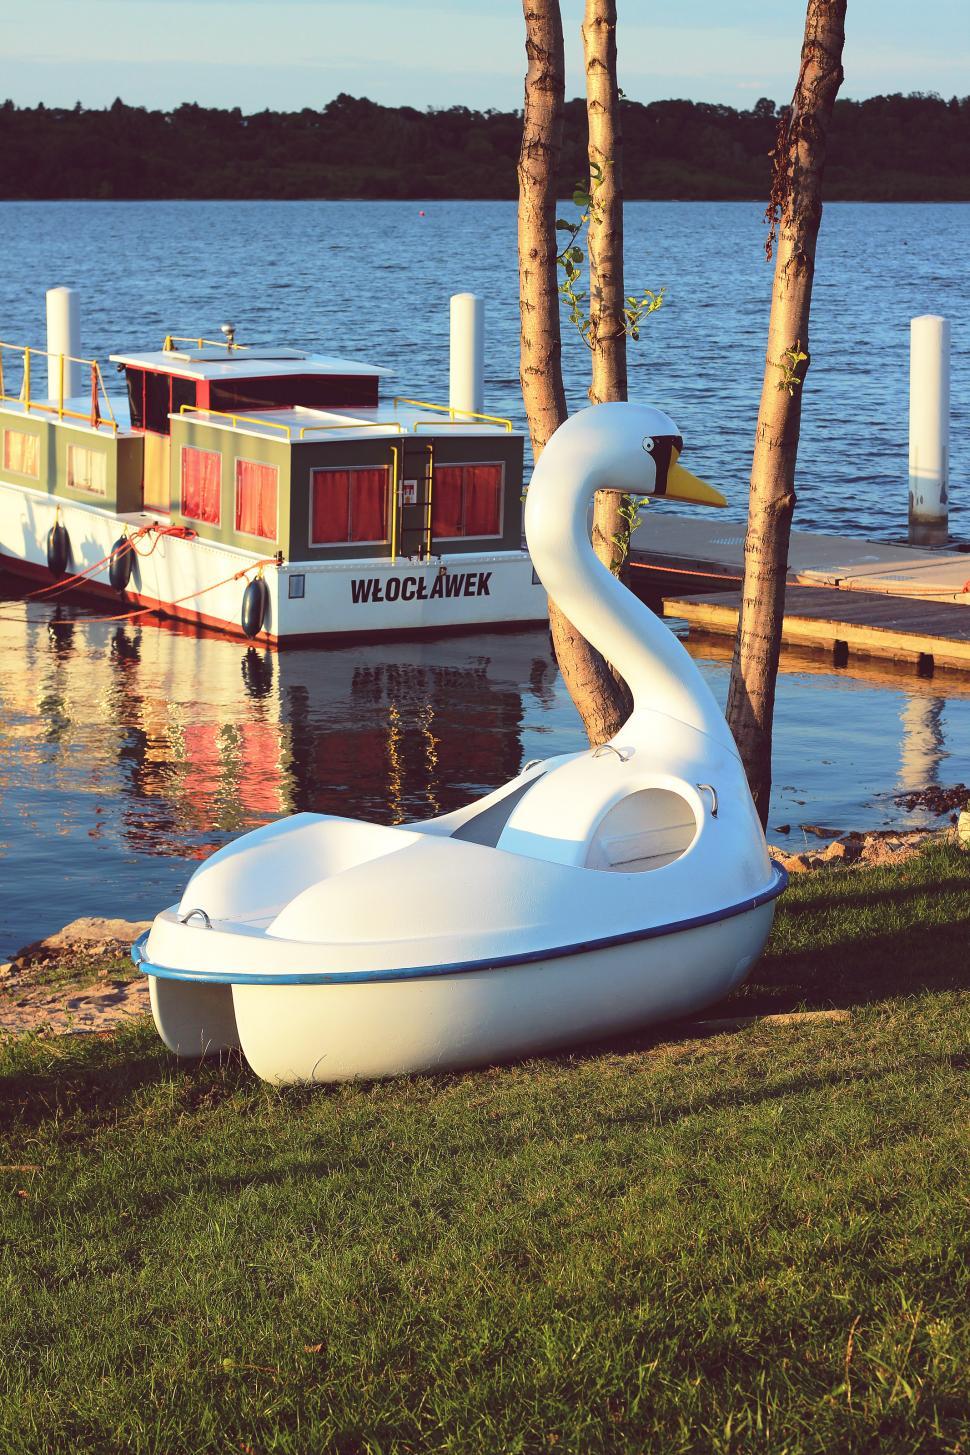 Free Image of Swan Shaped Boat by Lake Shore 